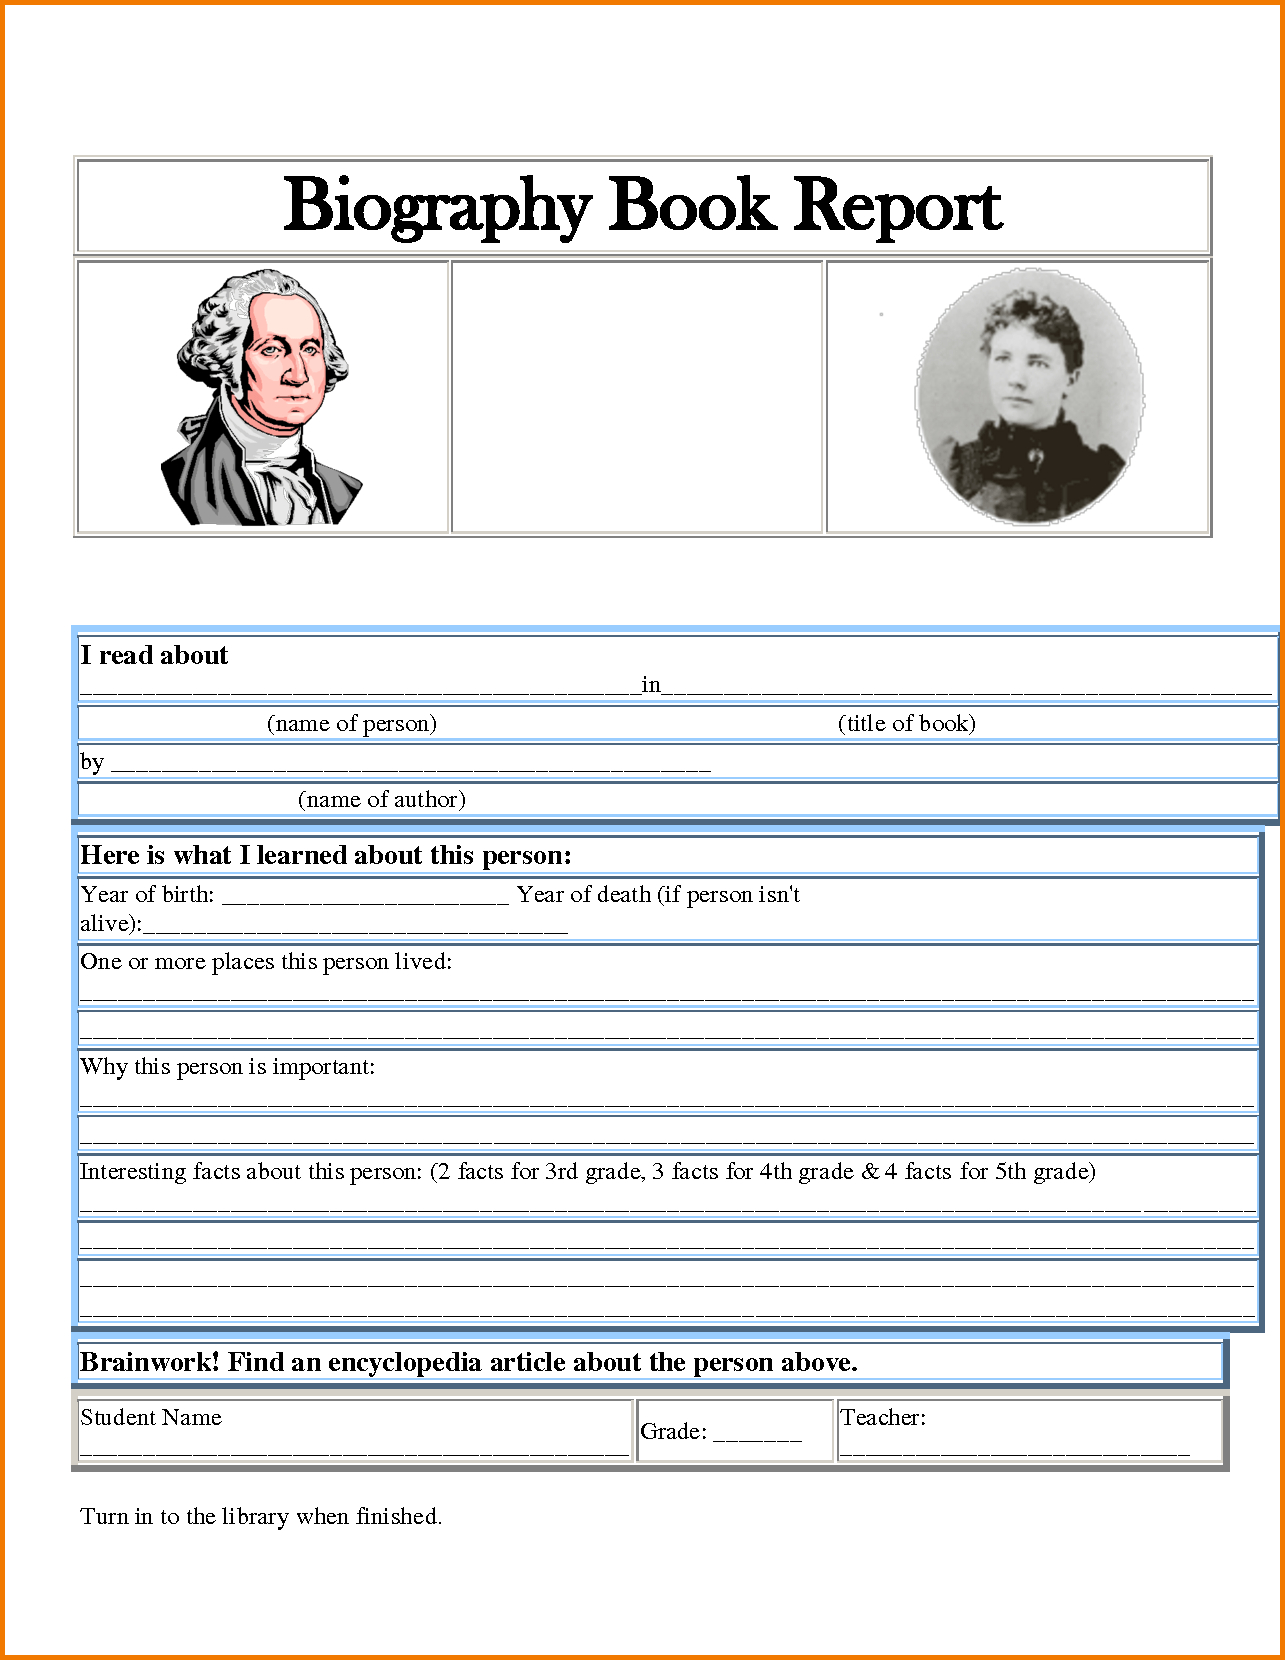 Biography Worksheet Template | Printable Worksheets And In Biography Book Report Template